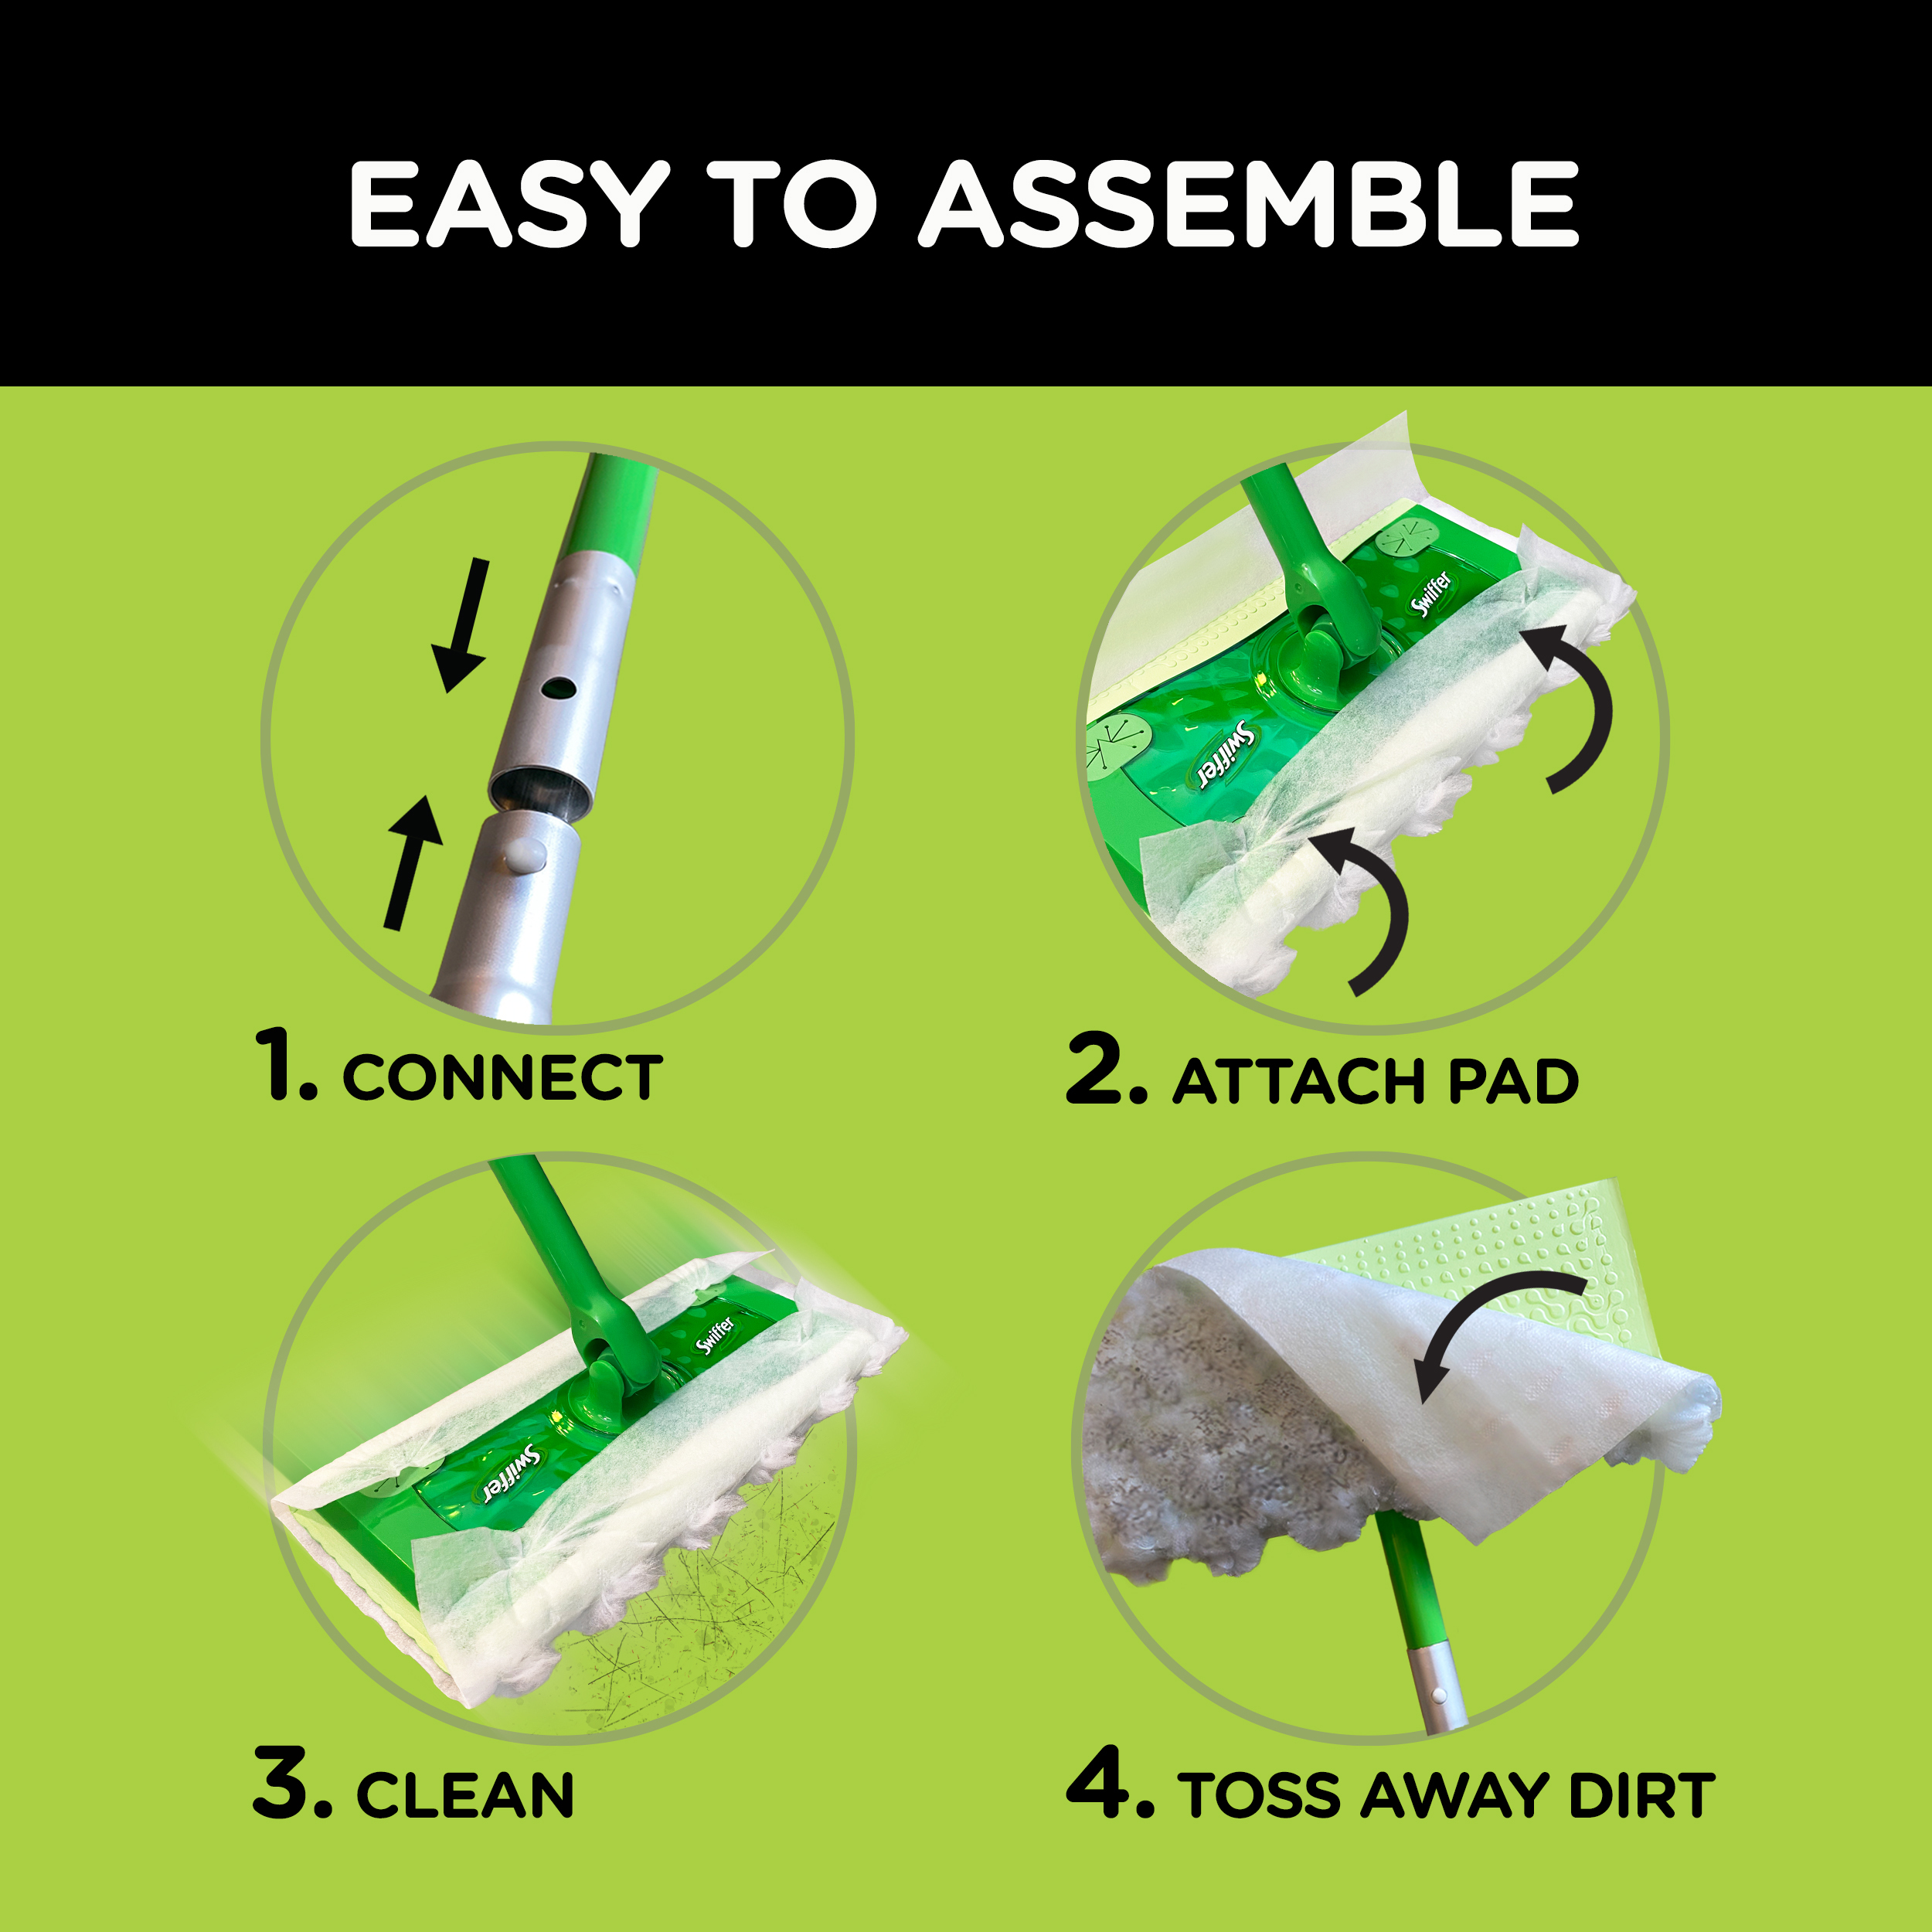 Swiffer Sweeper 2-in-1, Dry and Wet Multi Surface Floor Cleaner and Broom, Sweep and Mop Starter Kit - image 3 of 10